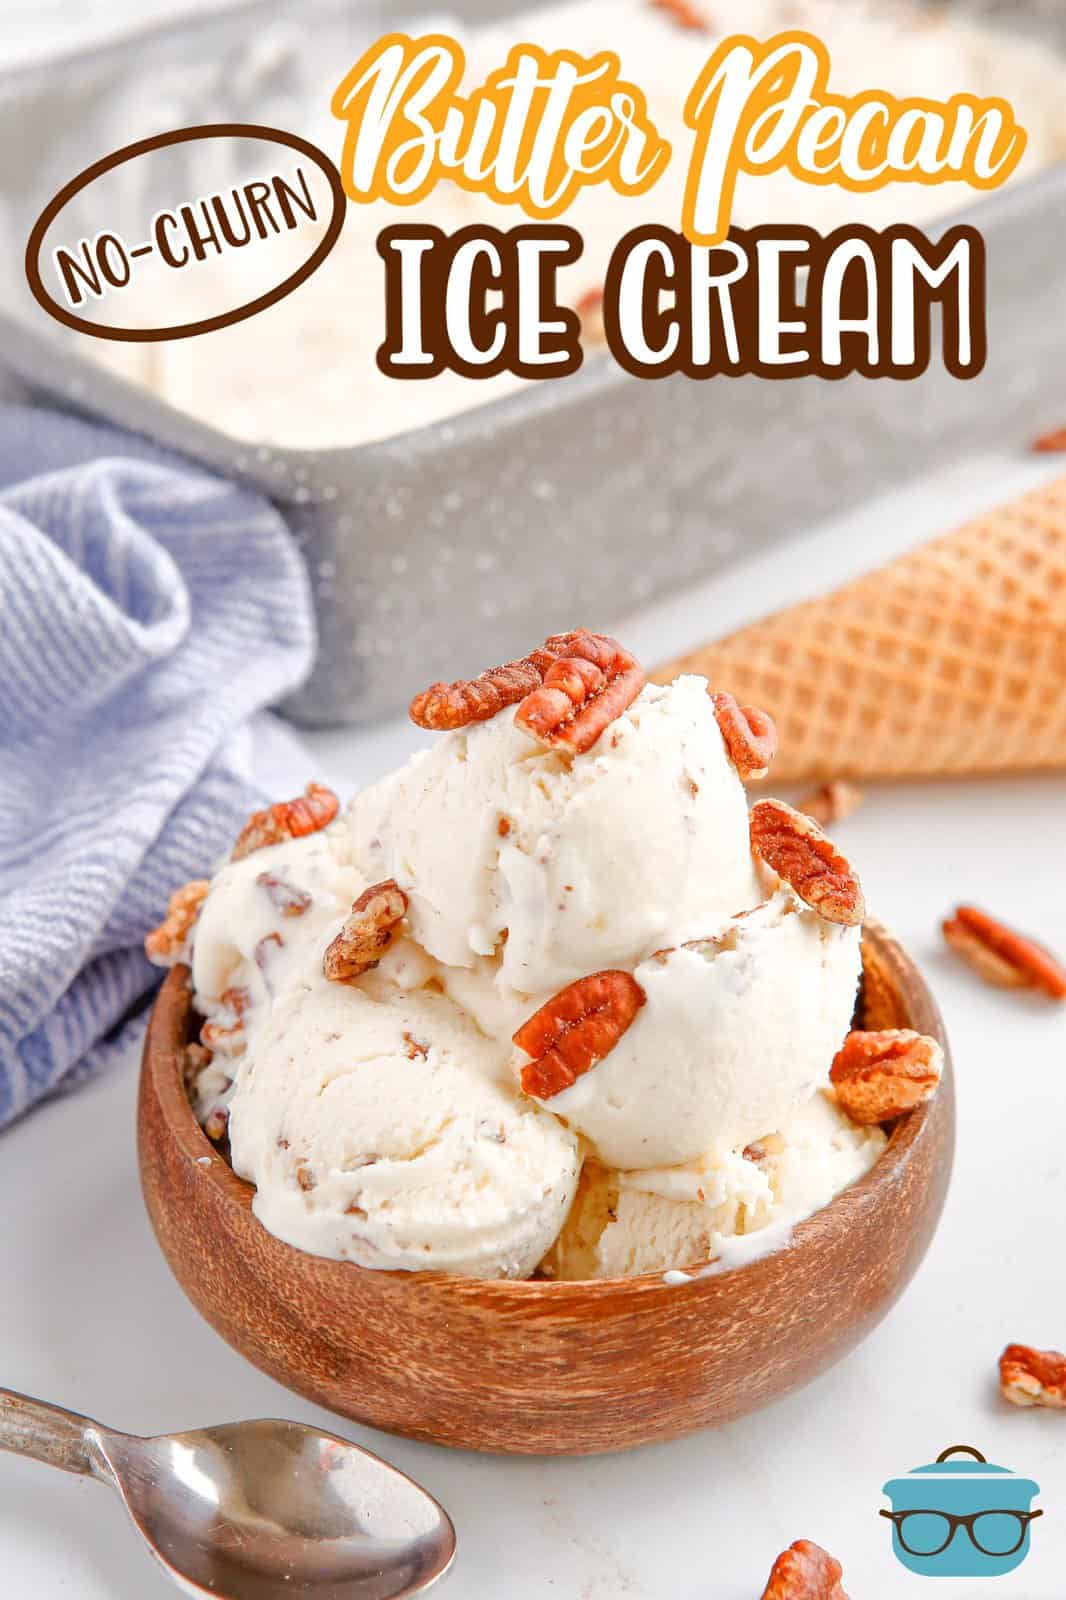 Bowl of No-Churn Butter Pecan Ice Cream in wooden bowl topped with pecans Pinterest image.